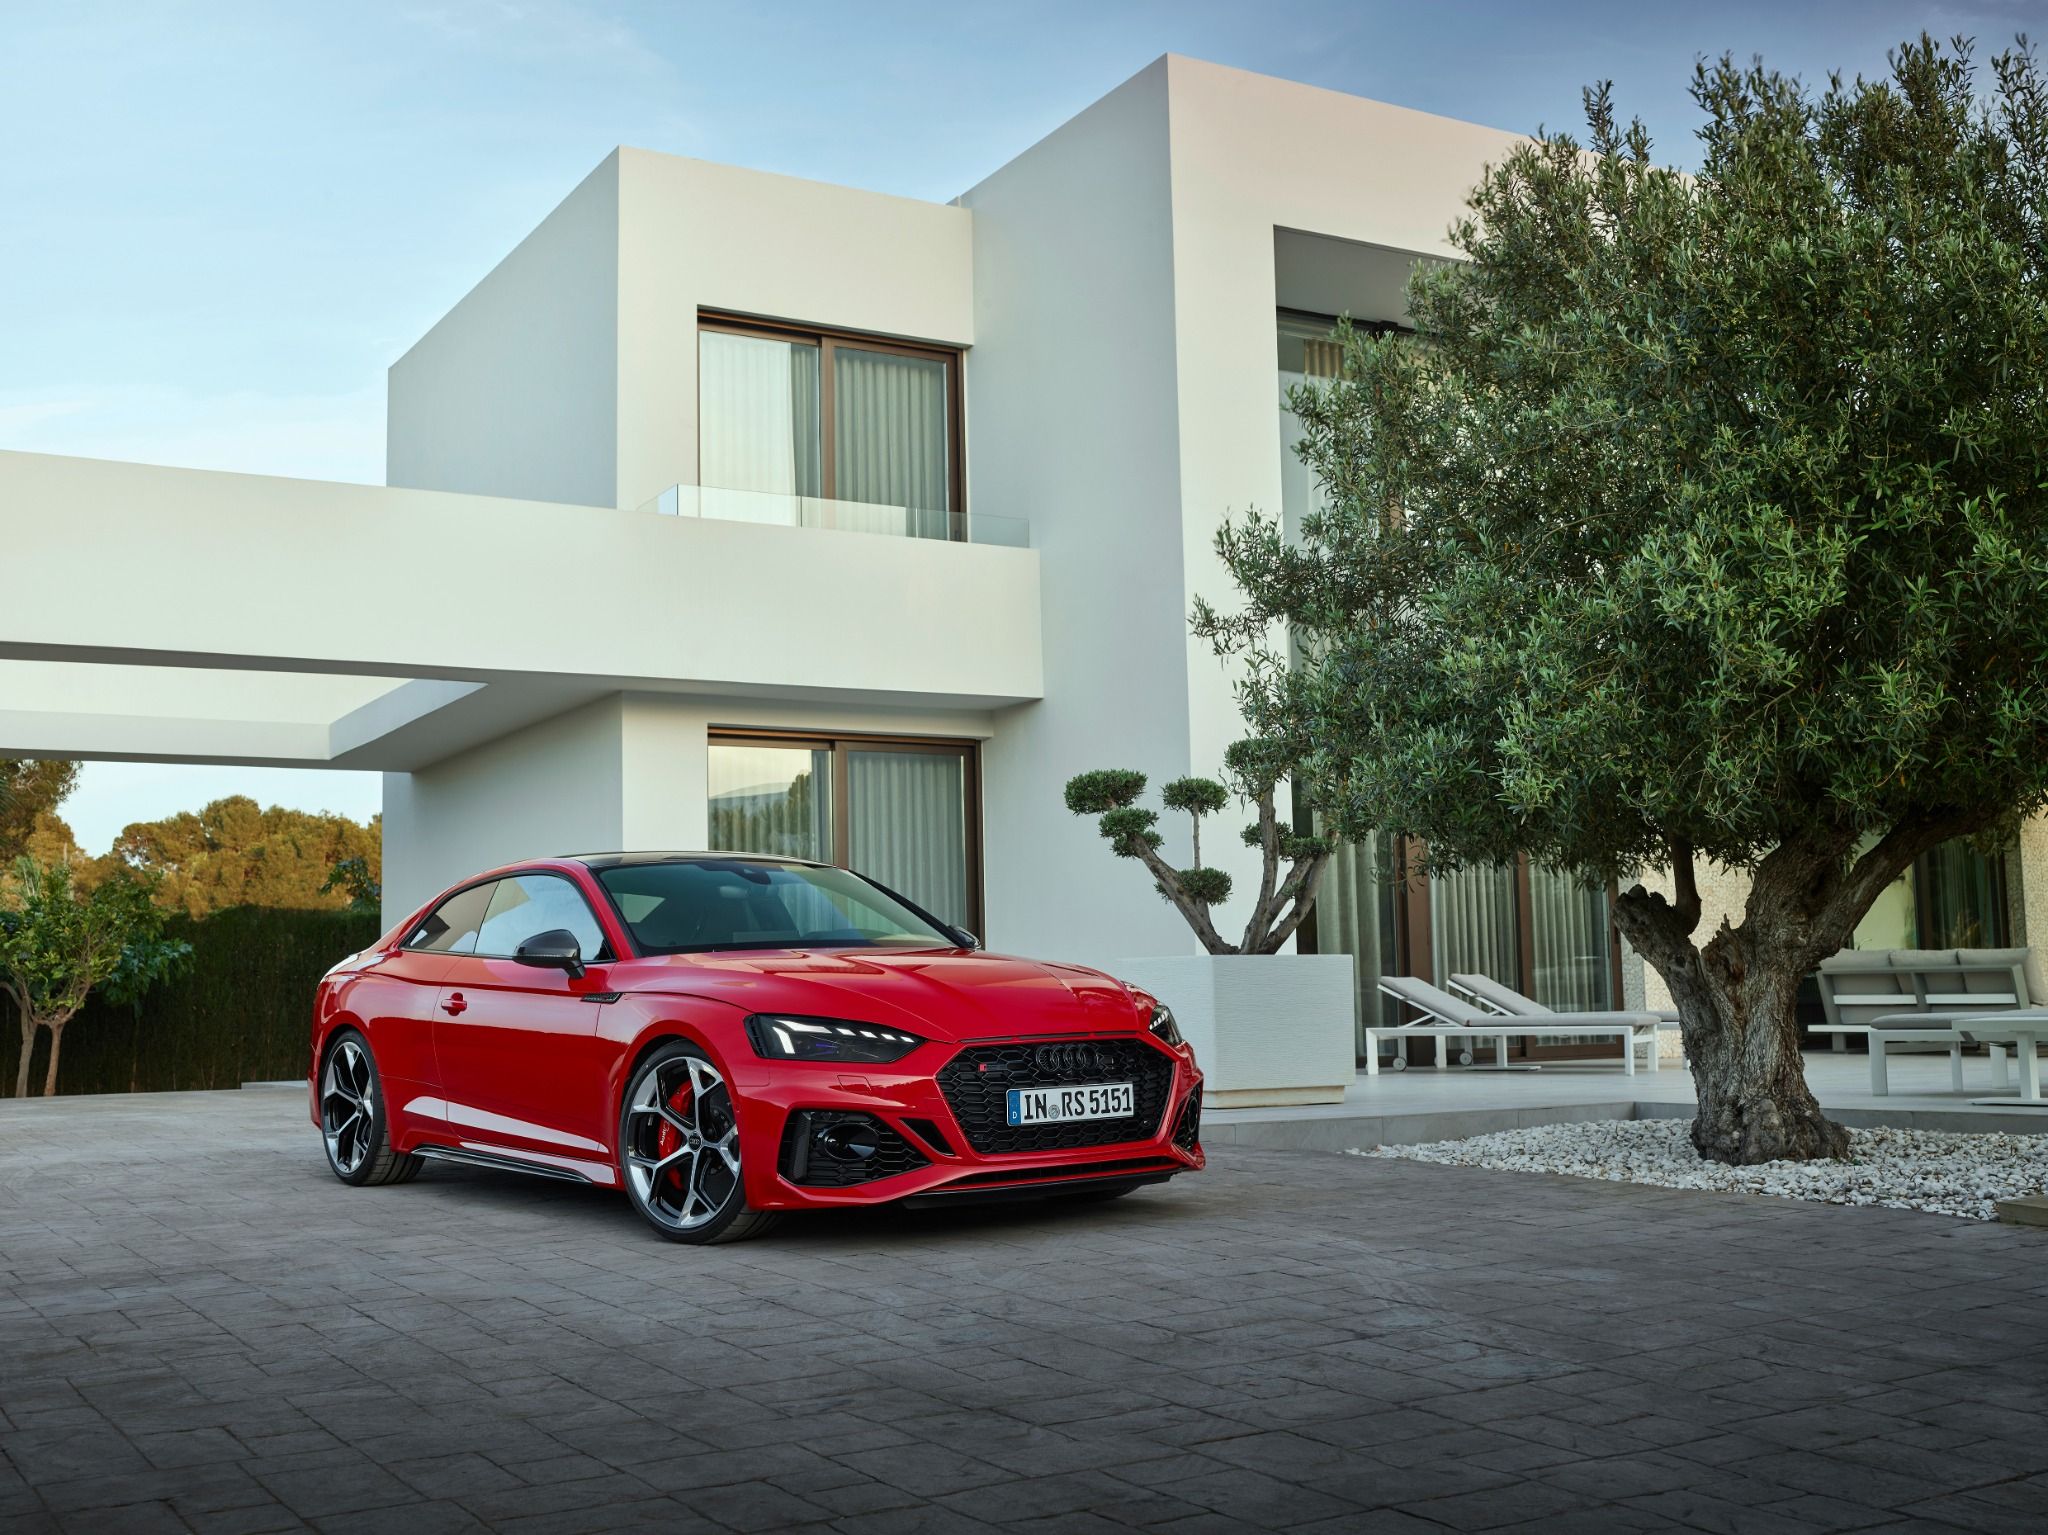 Audi RS5 Coupe parked in front of a building